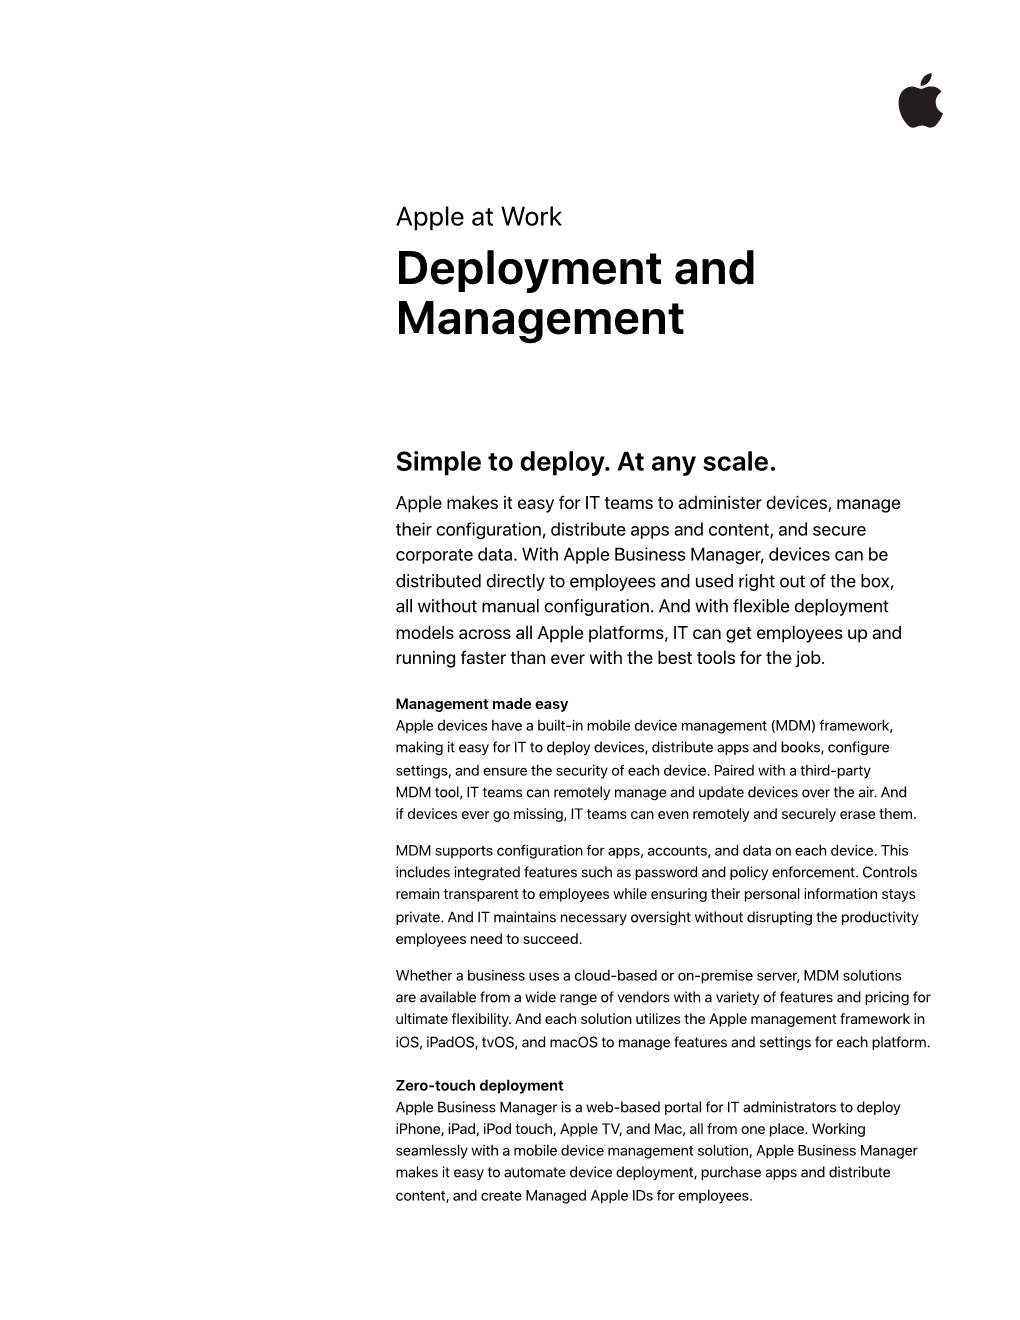 Deployment and Management